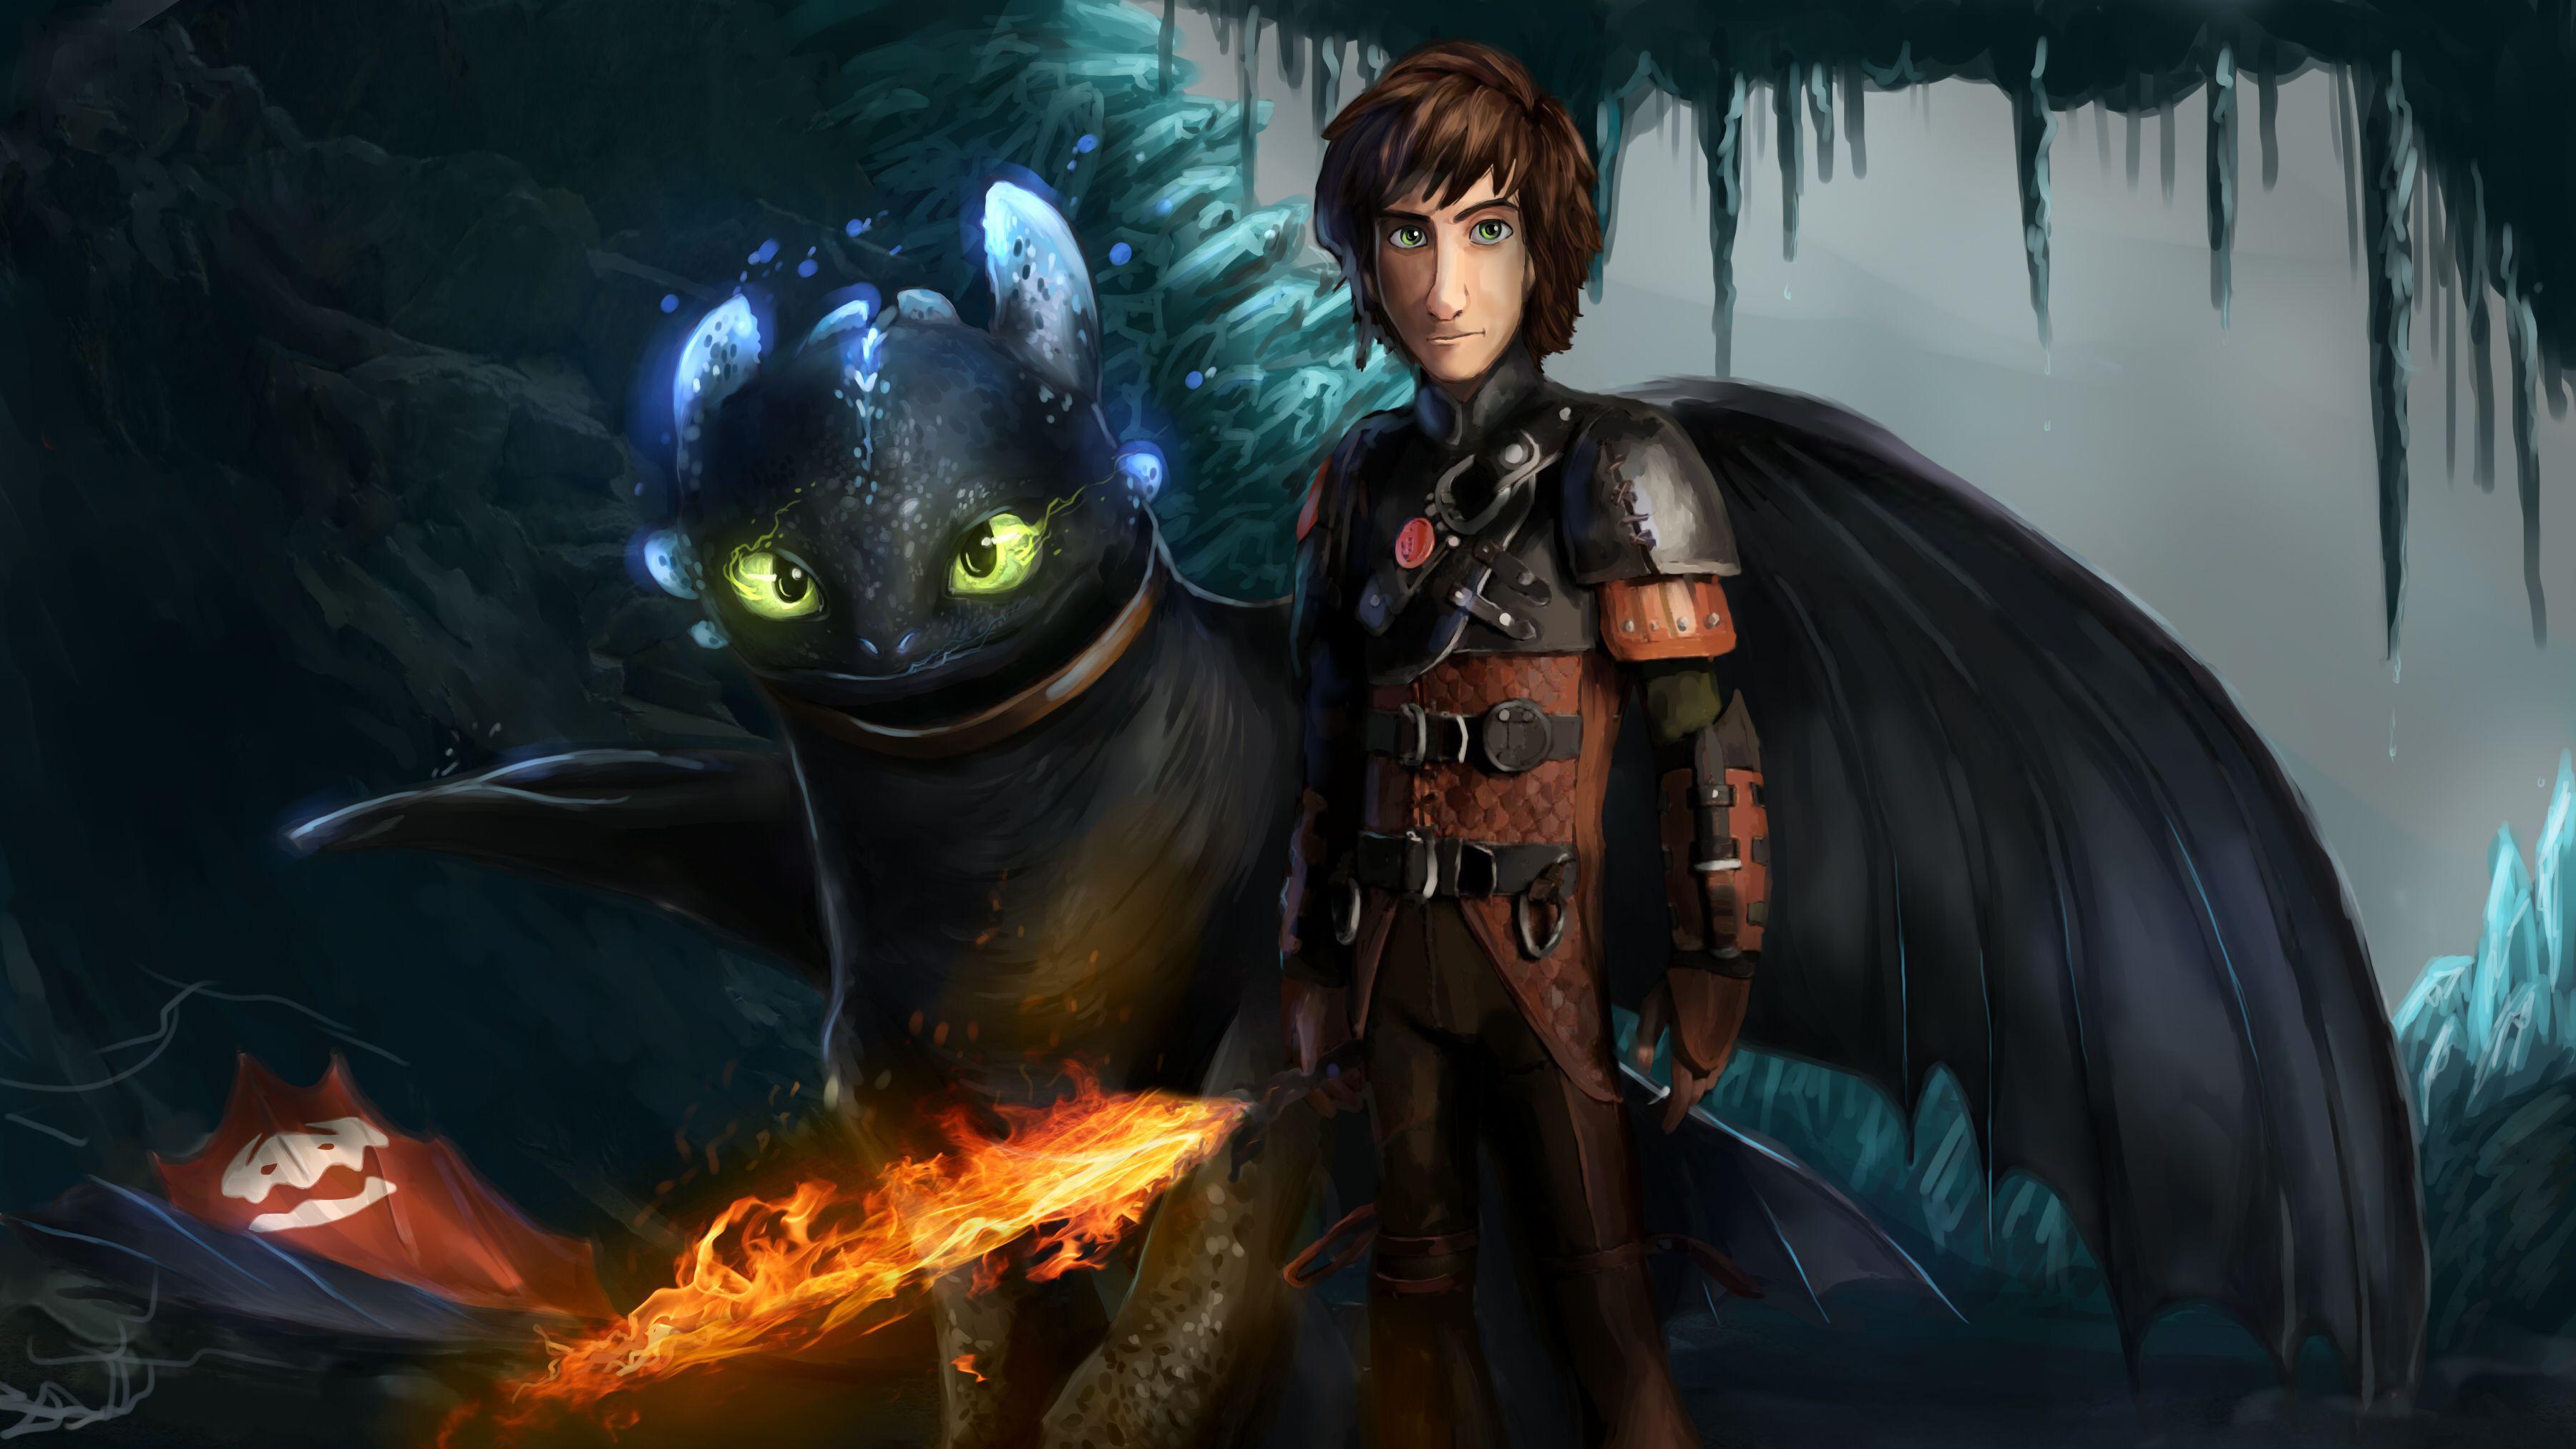 Hiccup (How to Train Your Dragon), Toothless (How to